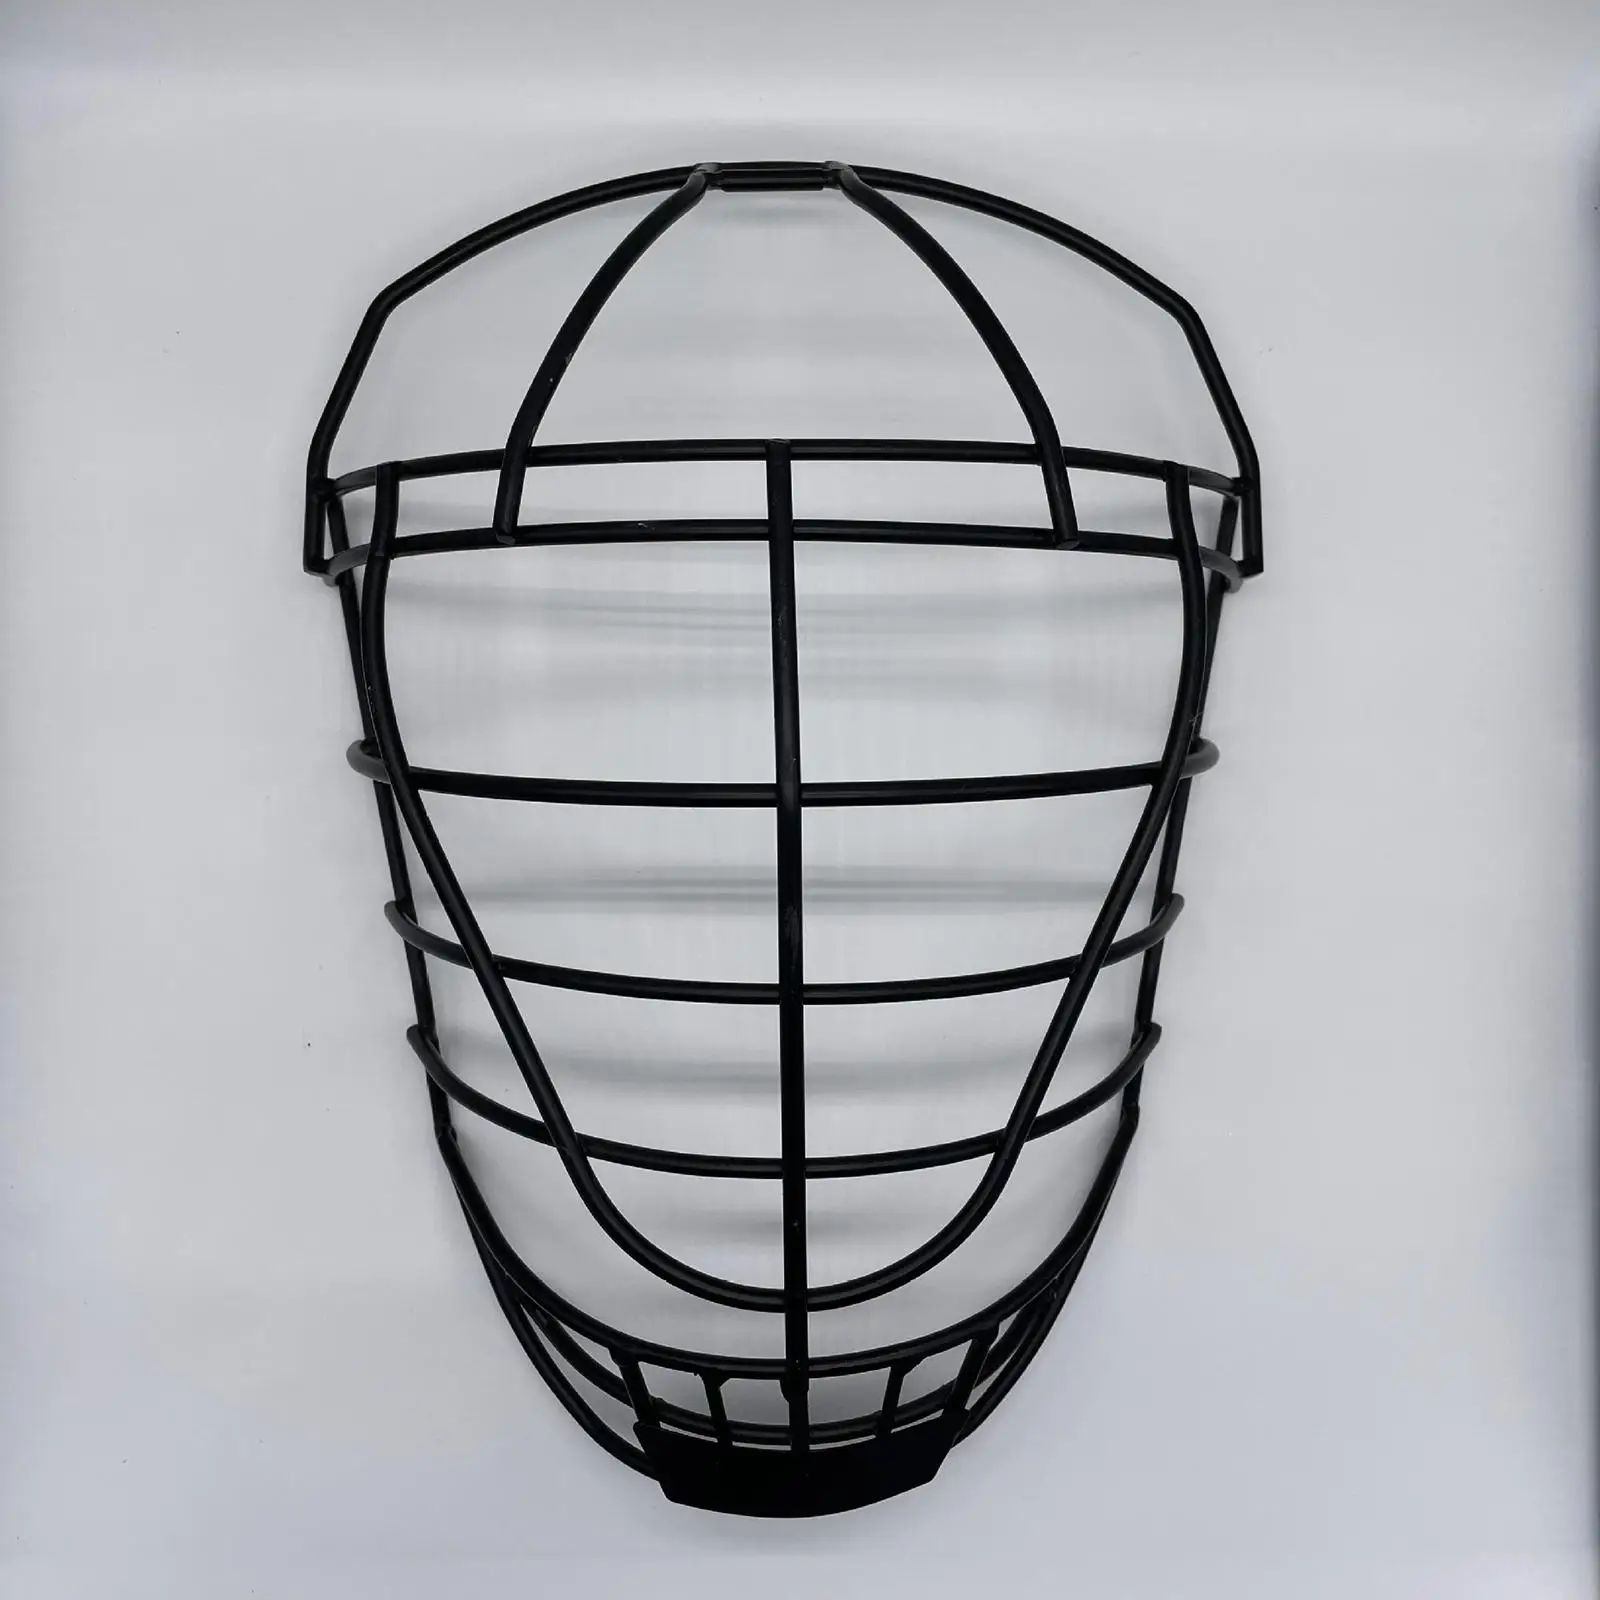 Durable Batting Helmet Mask Lightweight Wire Face Protective Safety Sports Accessories Baseball Face Guard for Teeball Softball